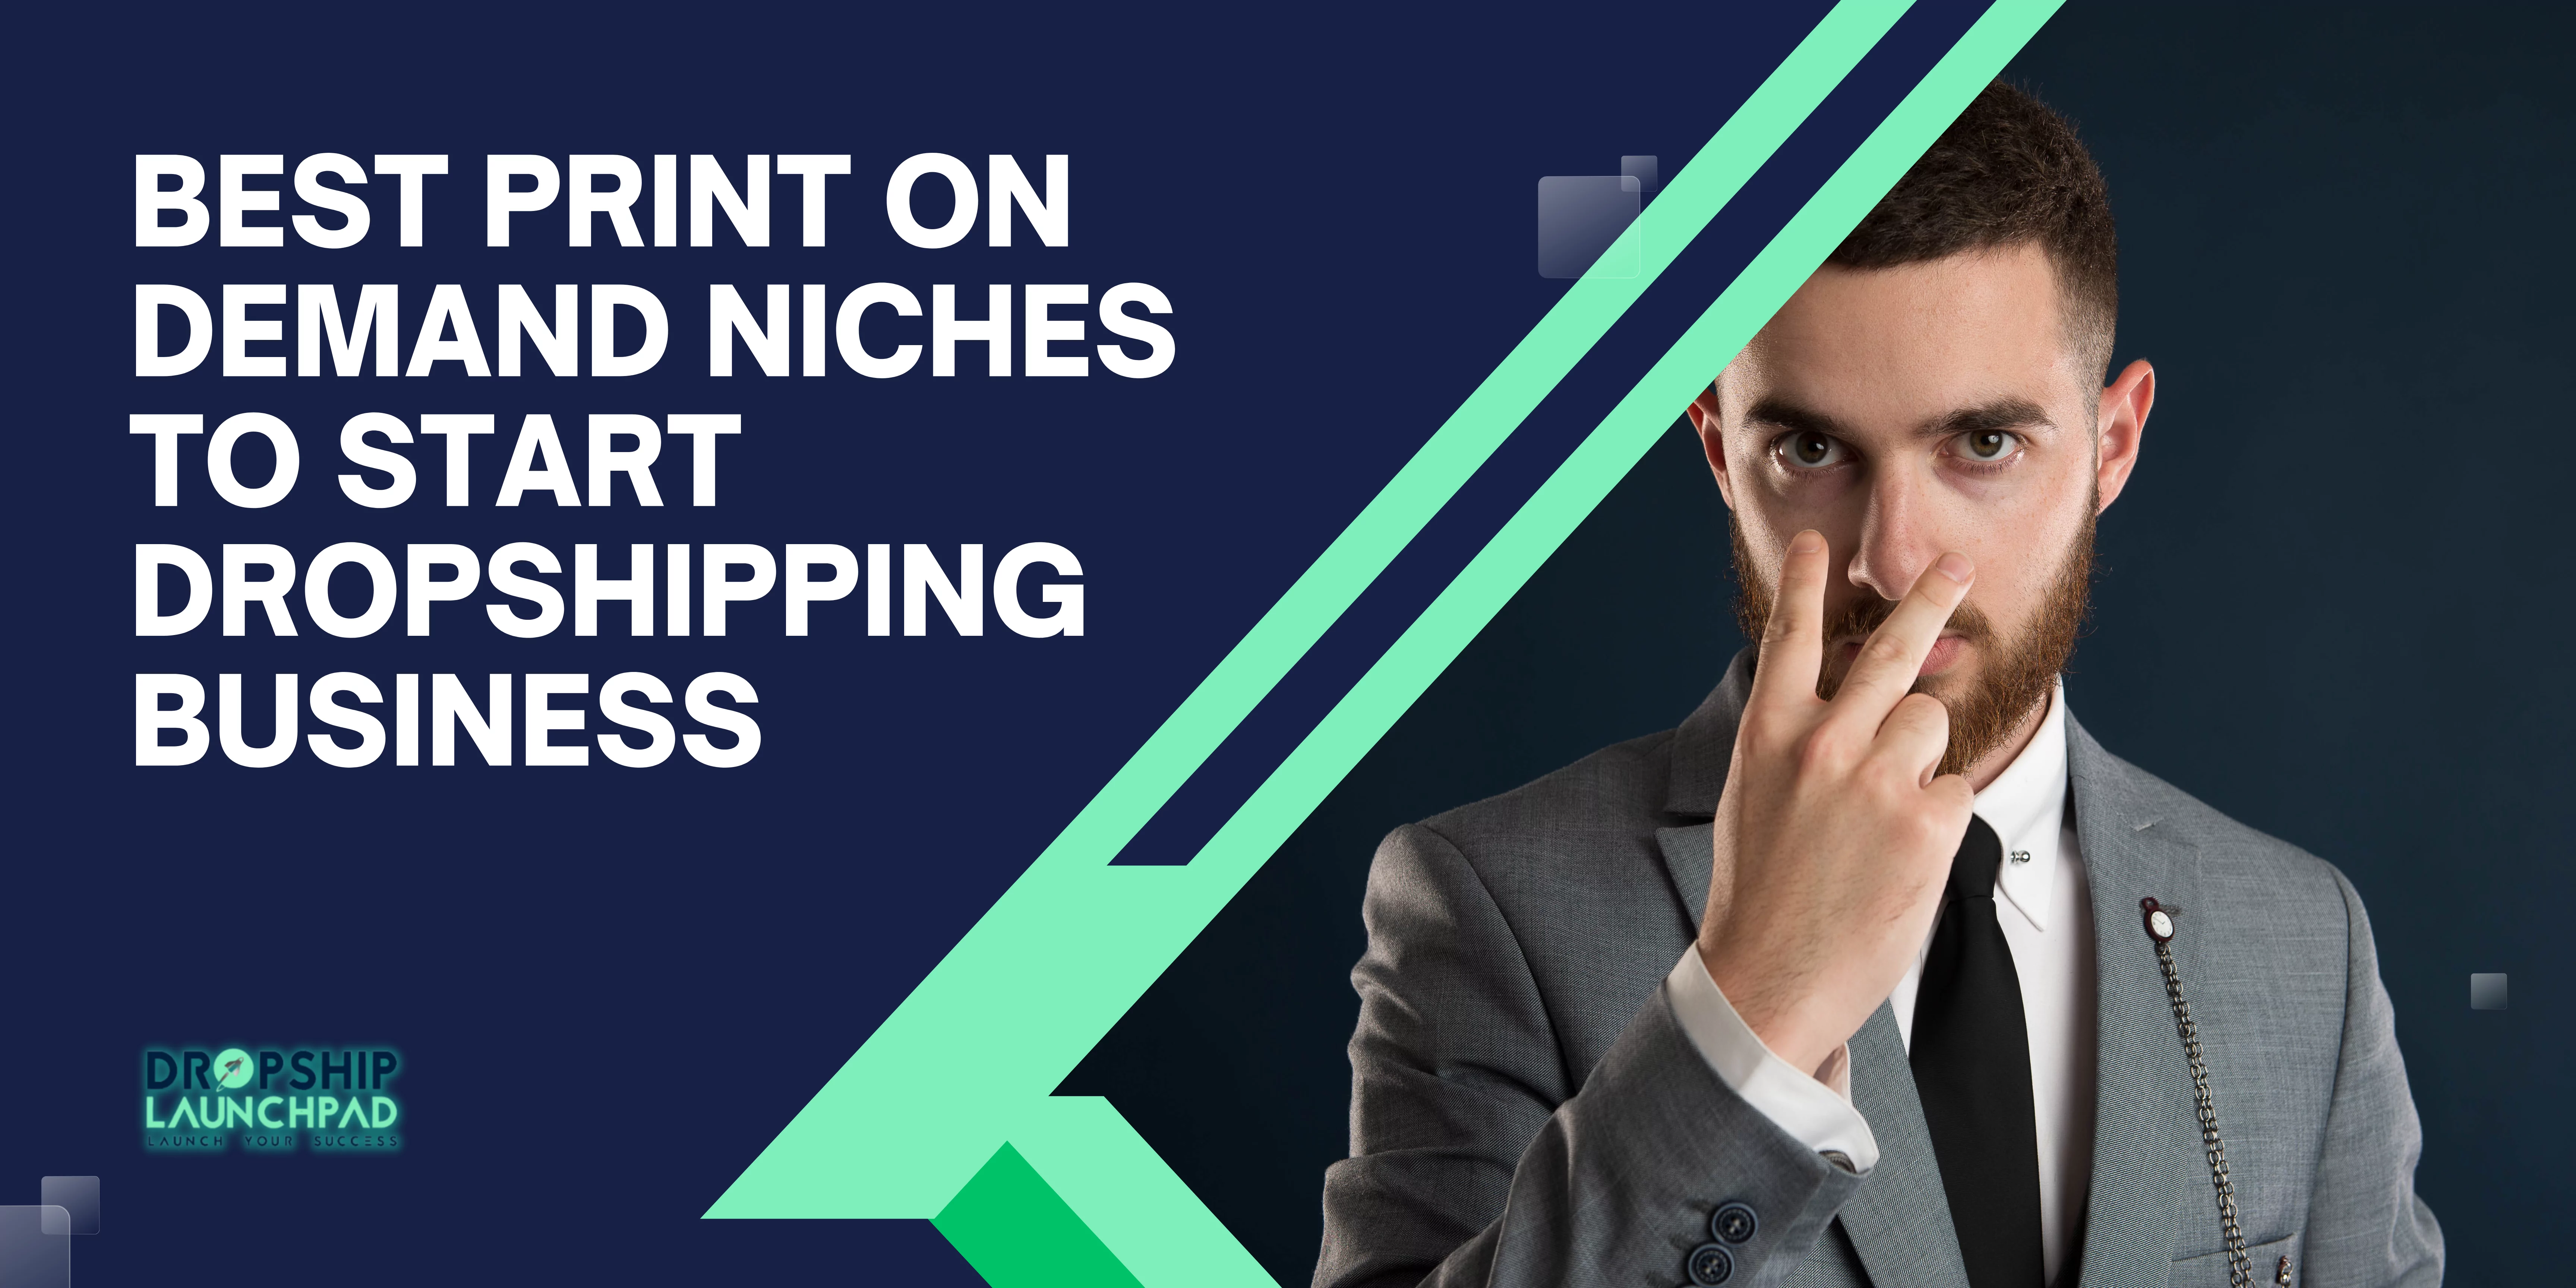 Best Print on Demand Niches to Start Dropshipping Business